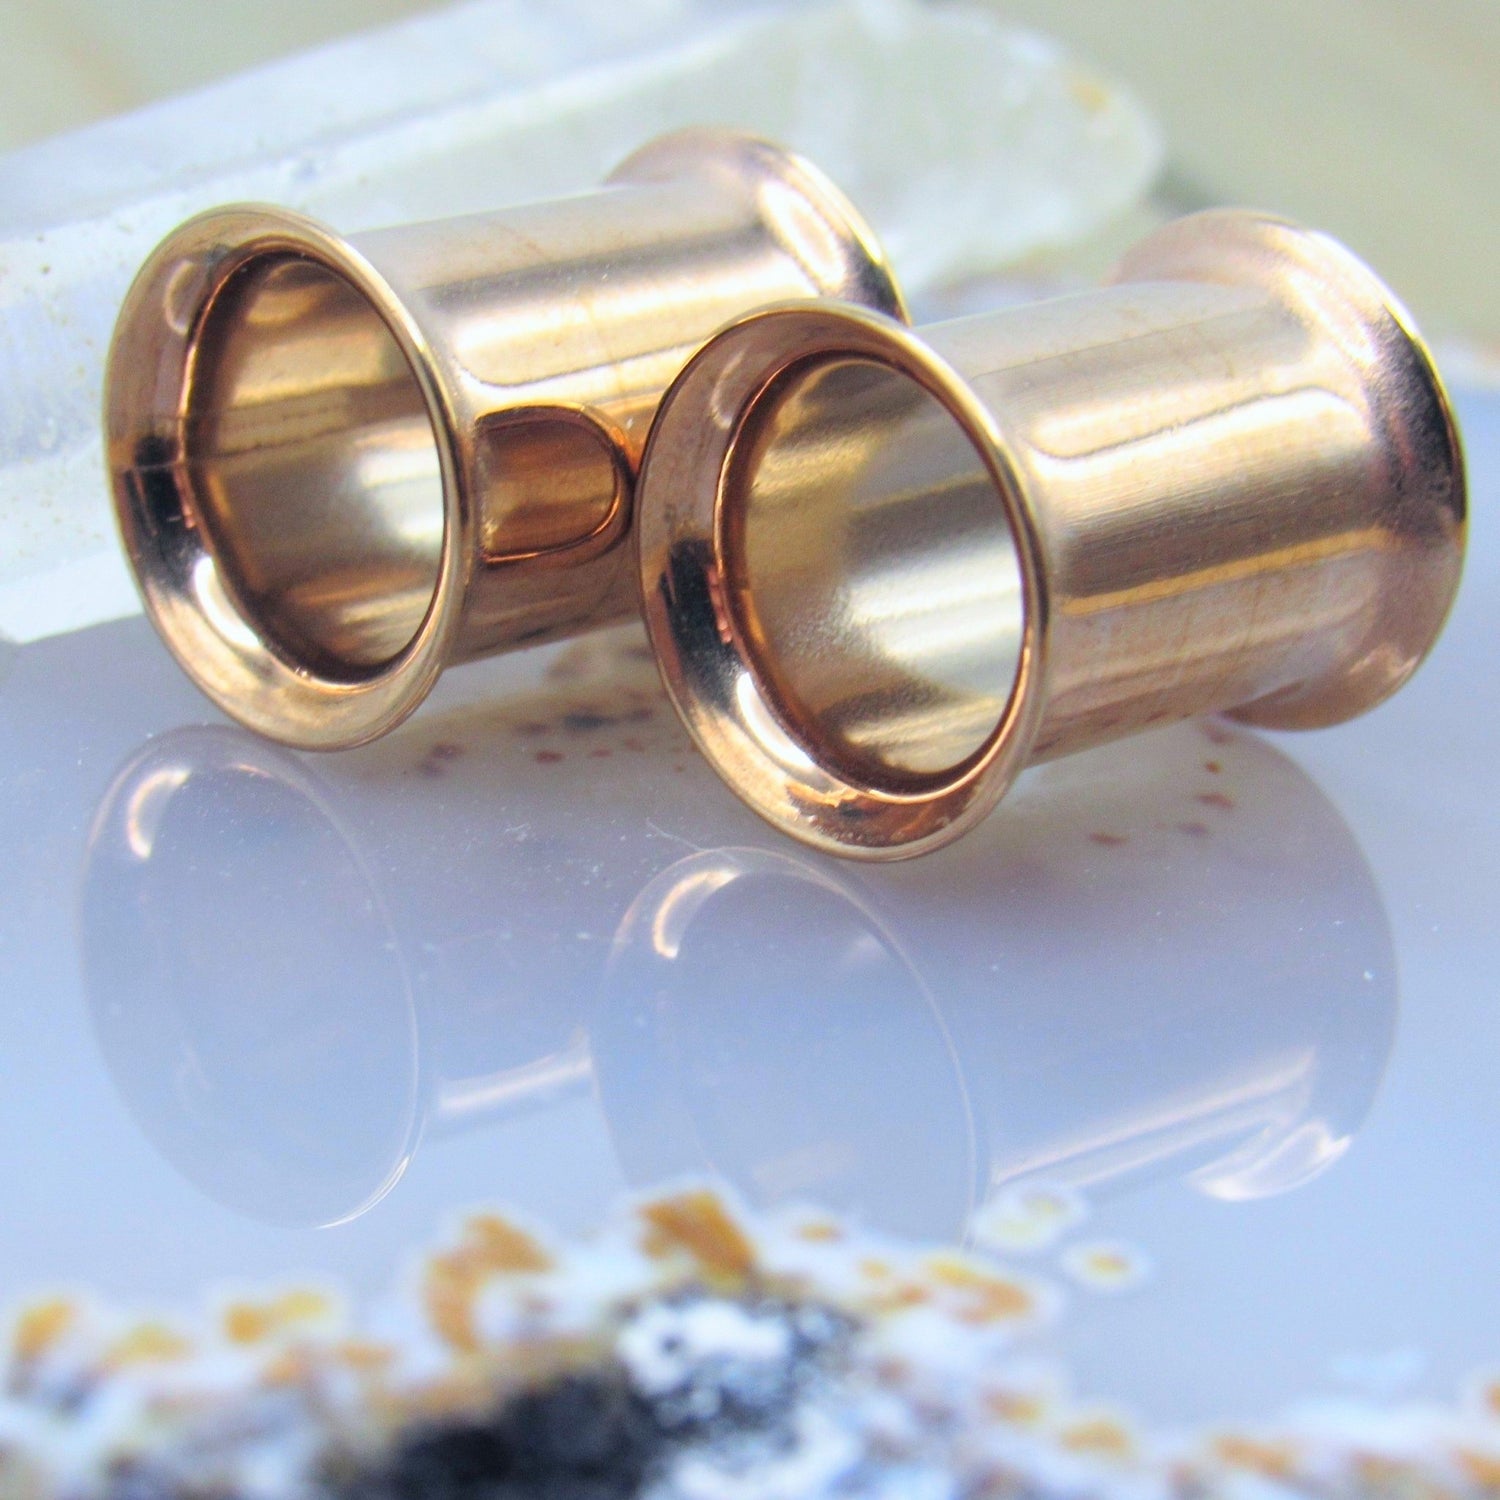 High Quality Body Piercing Jewelry Styles in Titanium, Stainless, Gold –  Siren Body Jewelry